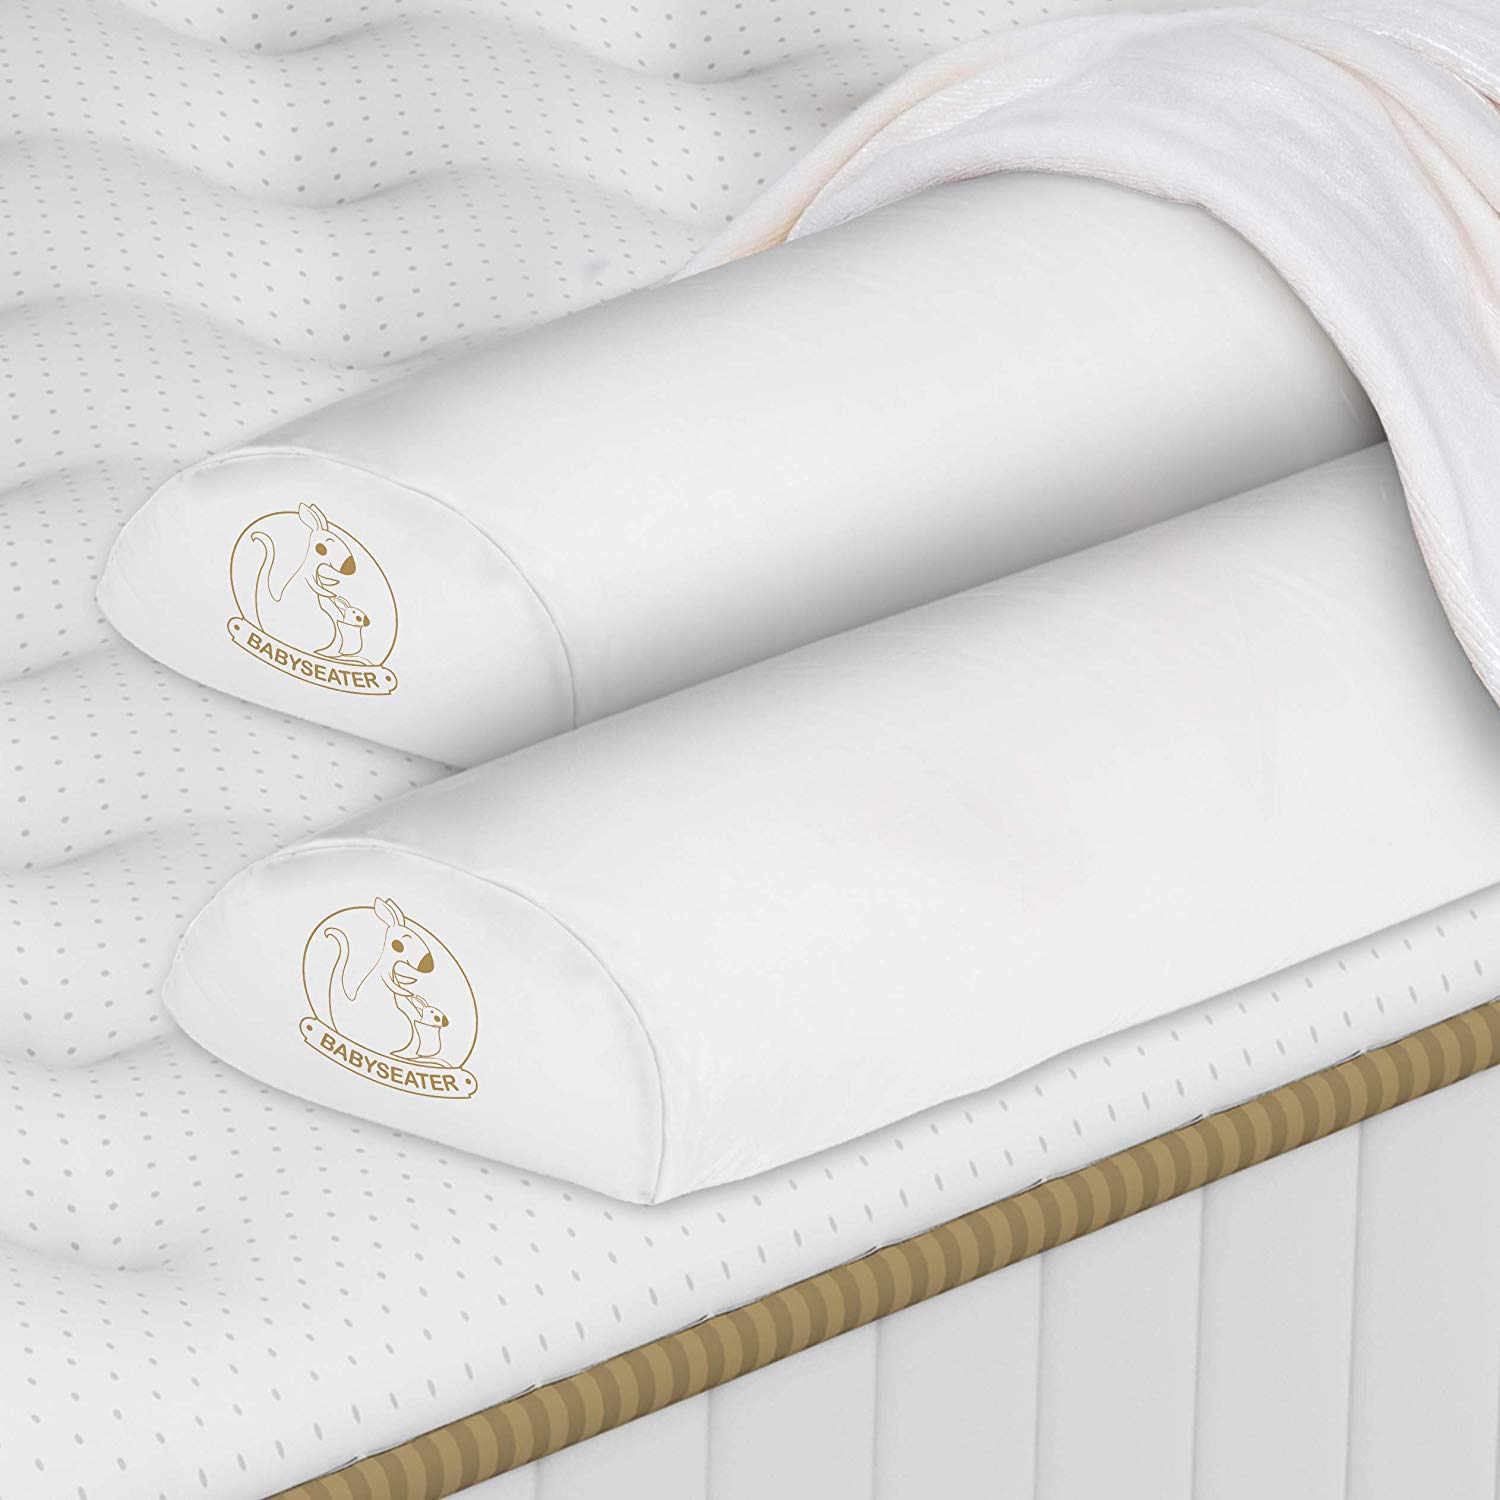 a set of bed bumpers on a mattress